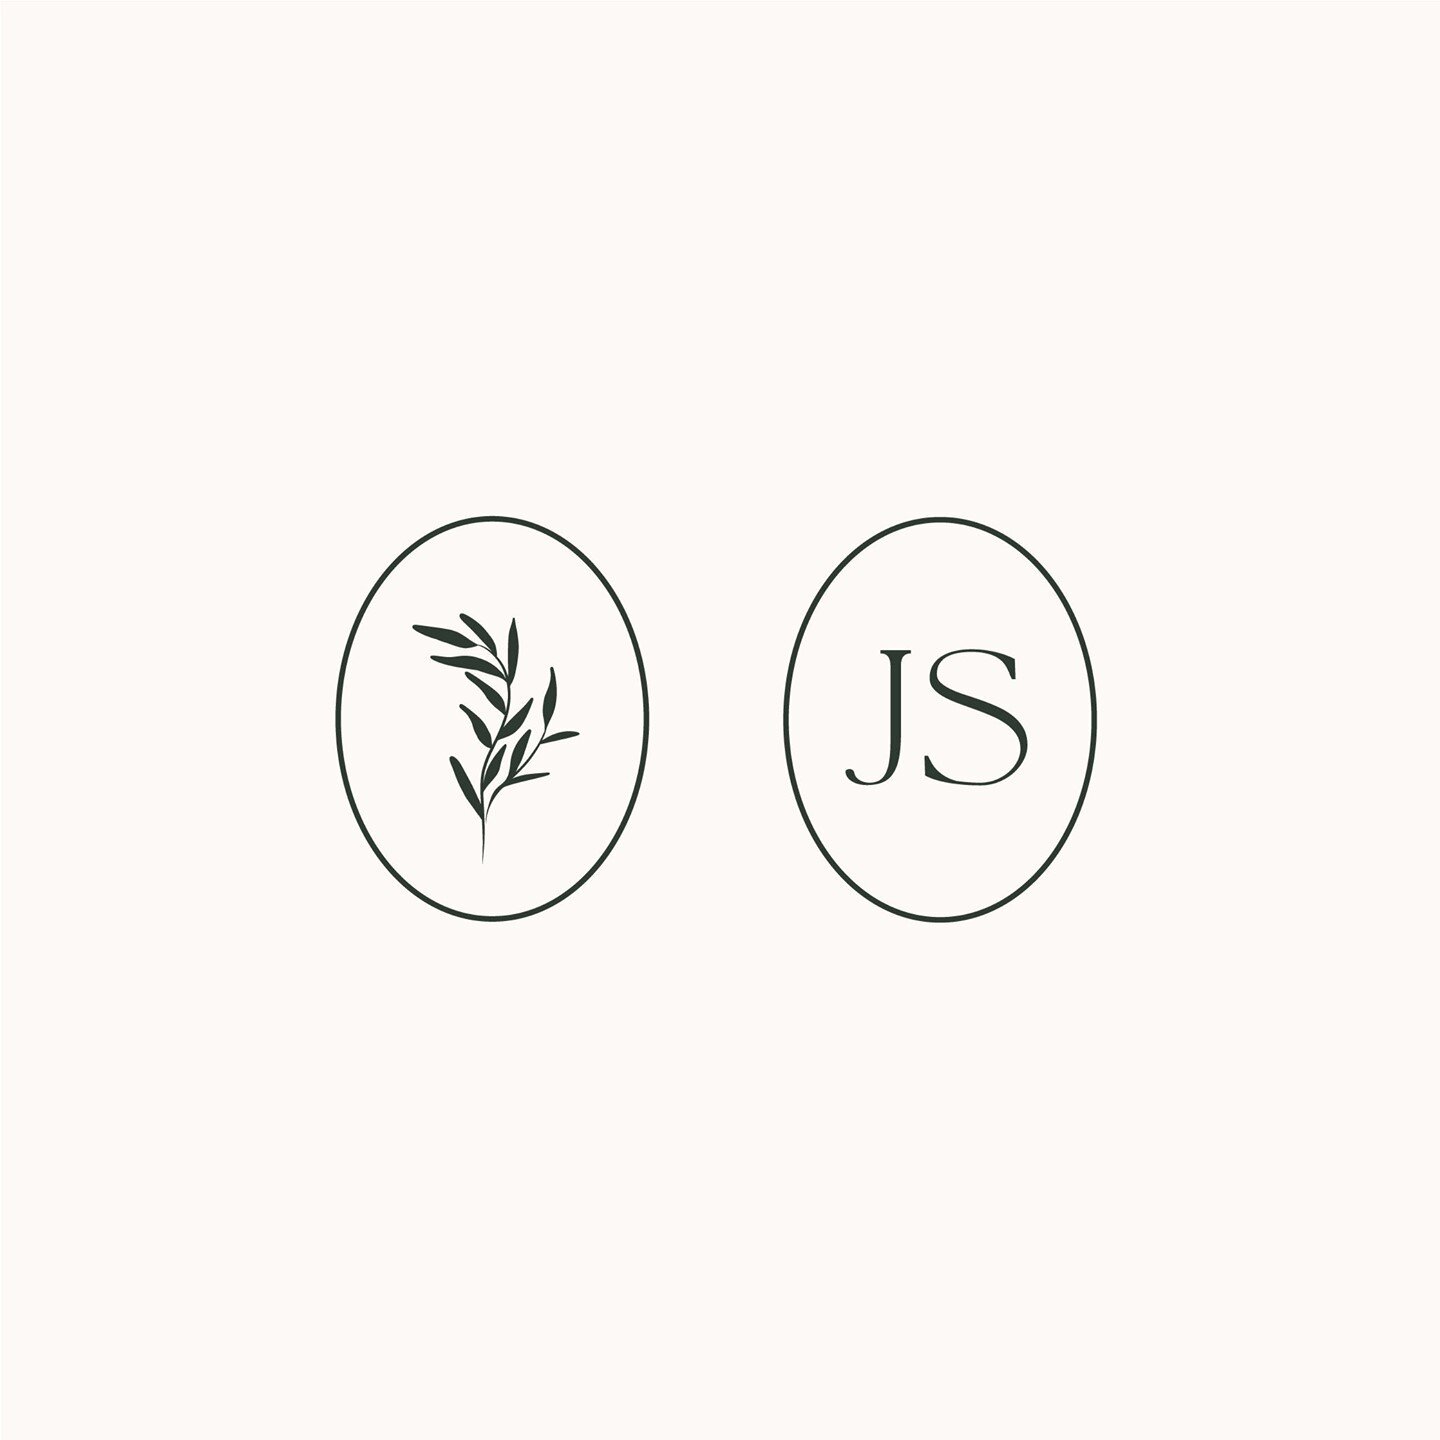 These submarks come as part of my Jasmine &amp; Sage custom brand suite.
⠀
If you're on a tight budget or just starting out and not ready to invest in a completely custom branding package then semi-custom brand suites are the perfect alternative.
⠀
V